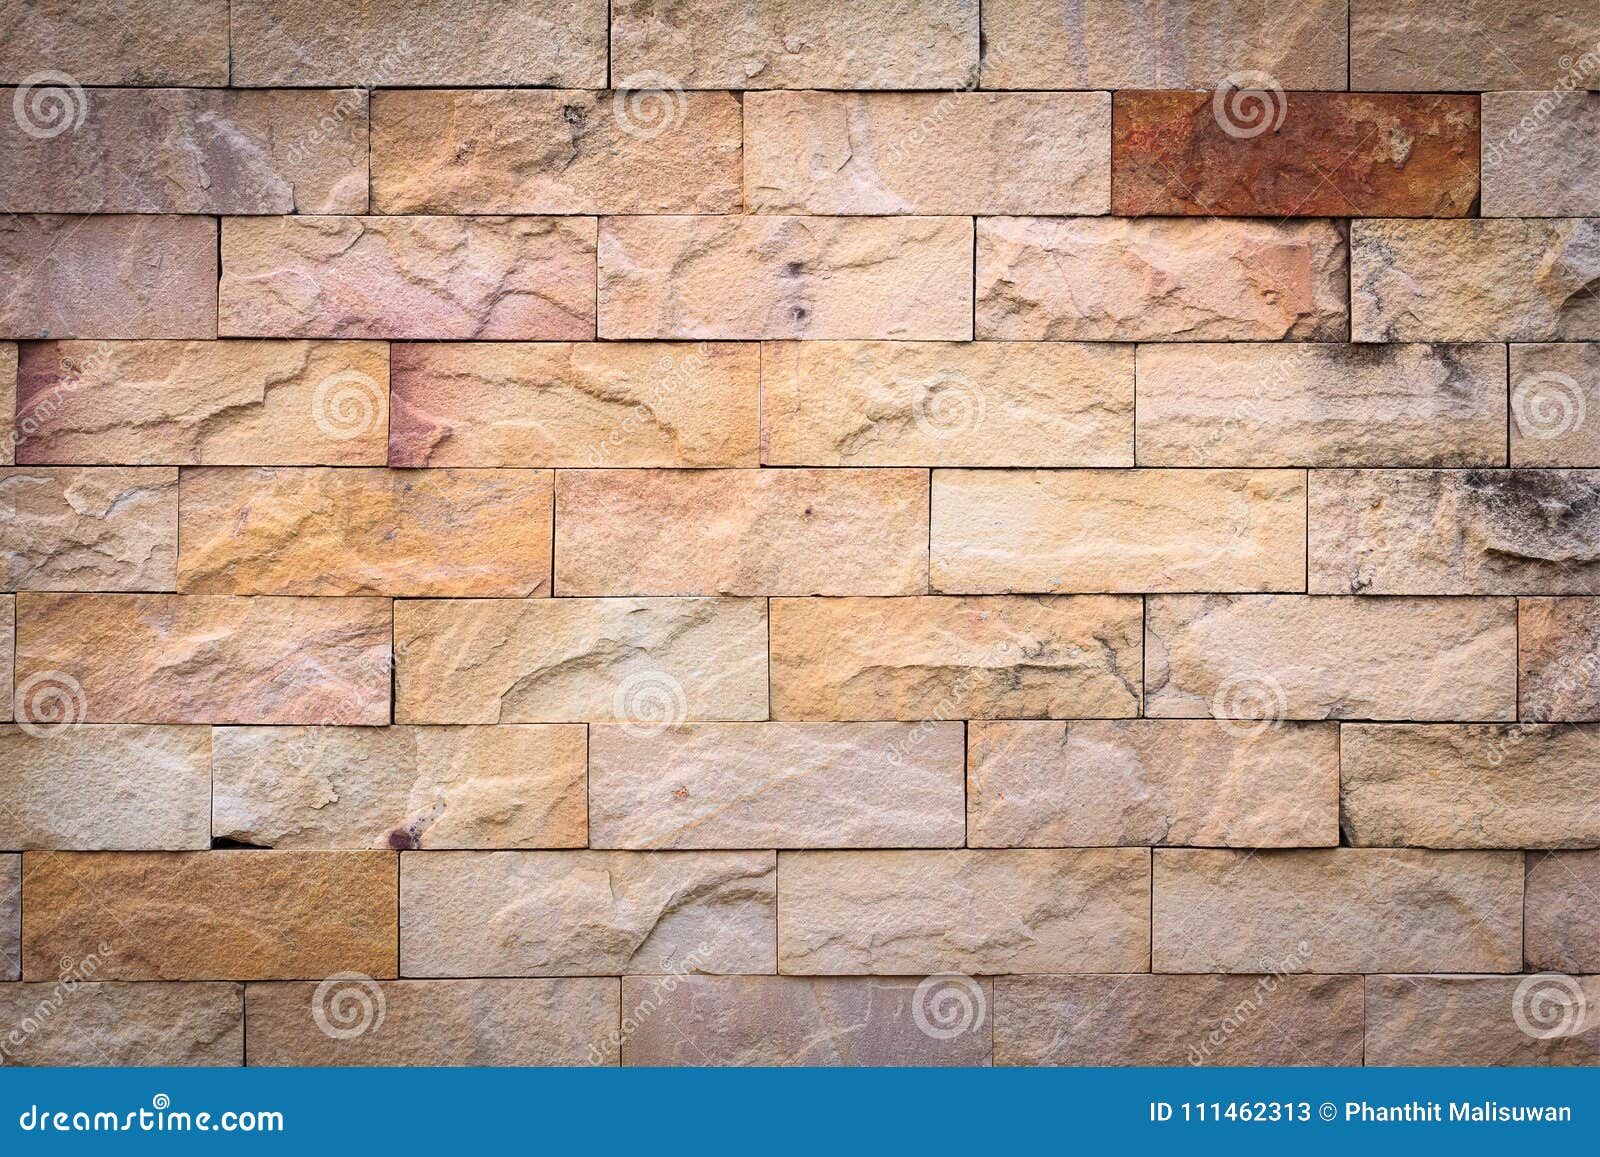 750 Brick Texture Pictures  Download Free Images on Unsplash